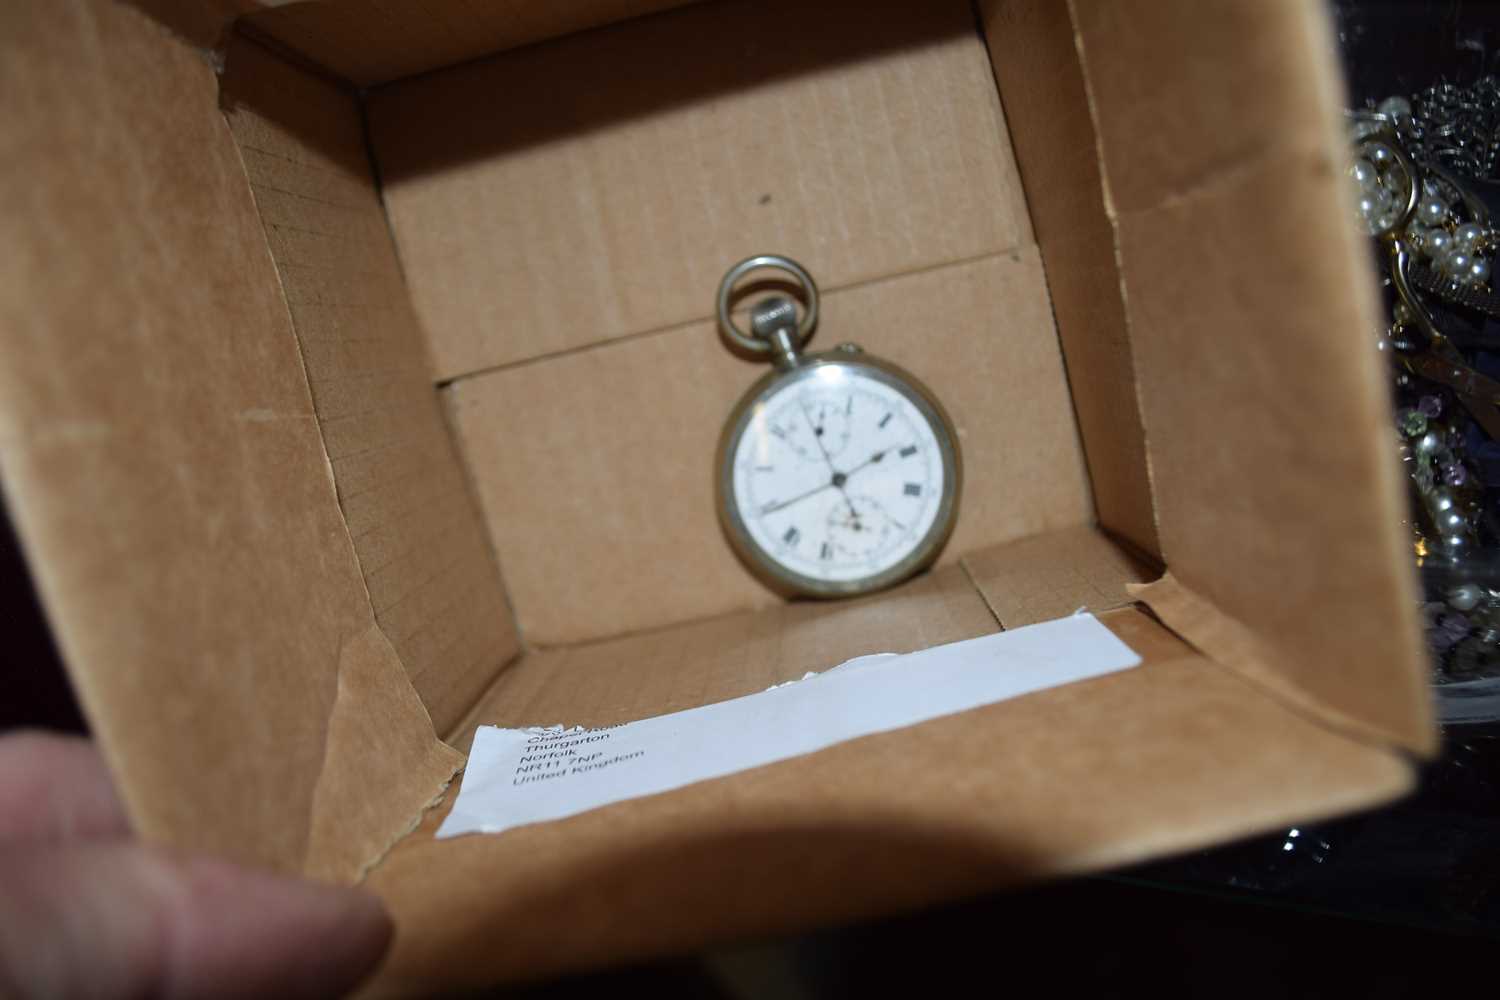 Early 20th Century pocket watch in silver plated case